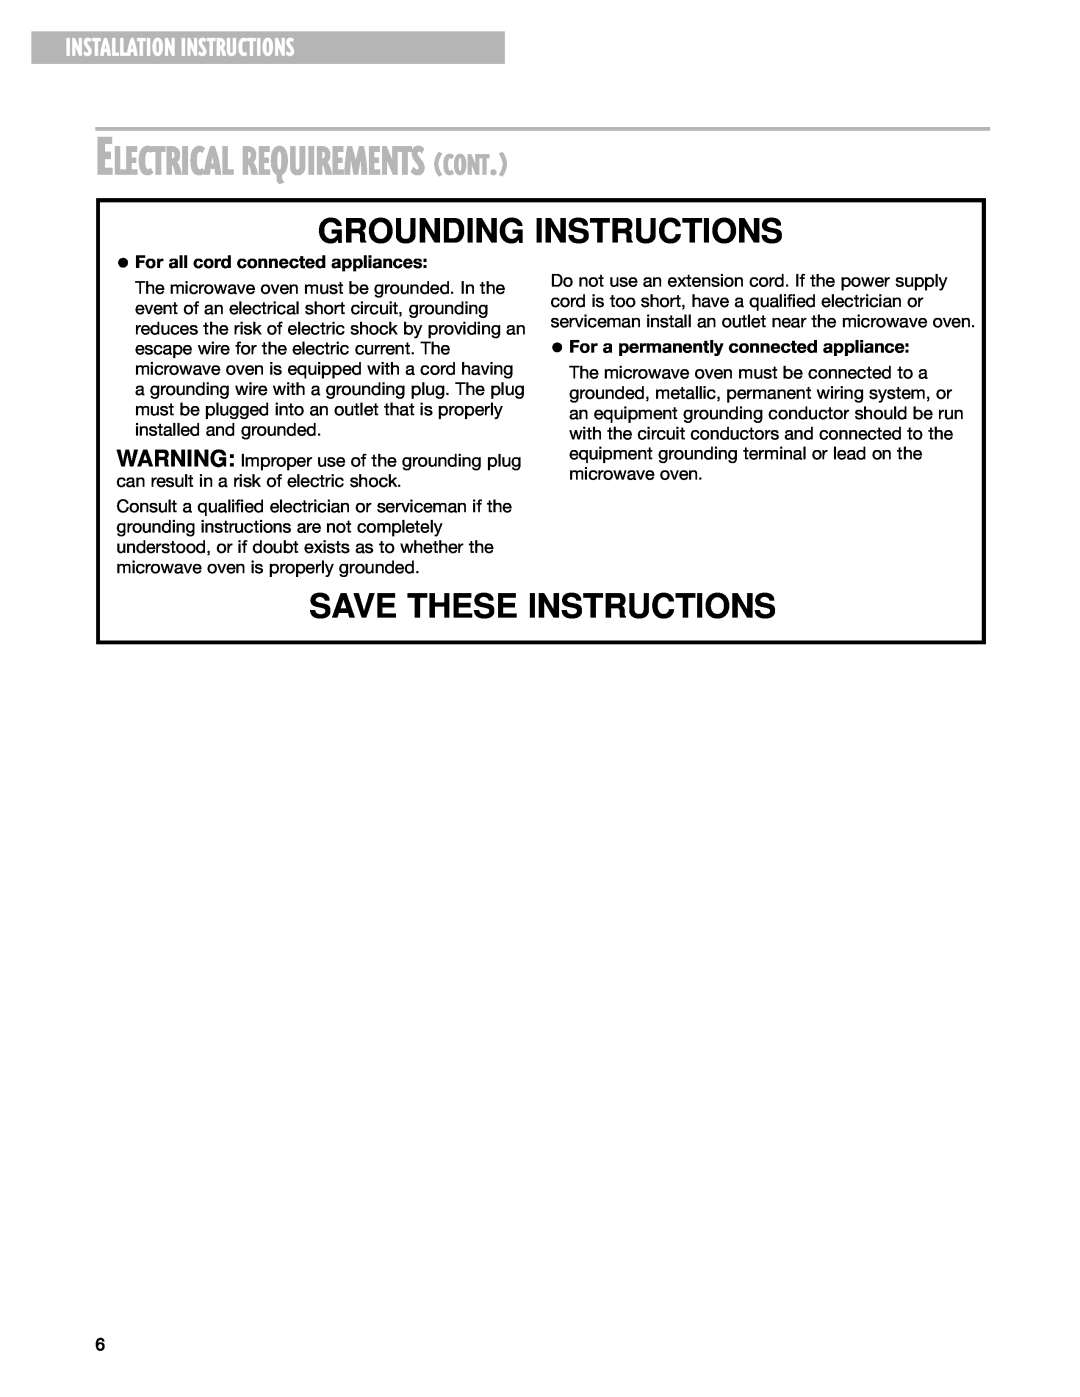 Whirlpool MT1111SK Electrical Requirements Cont, Grounding Instructions, Installation Instructions 